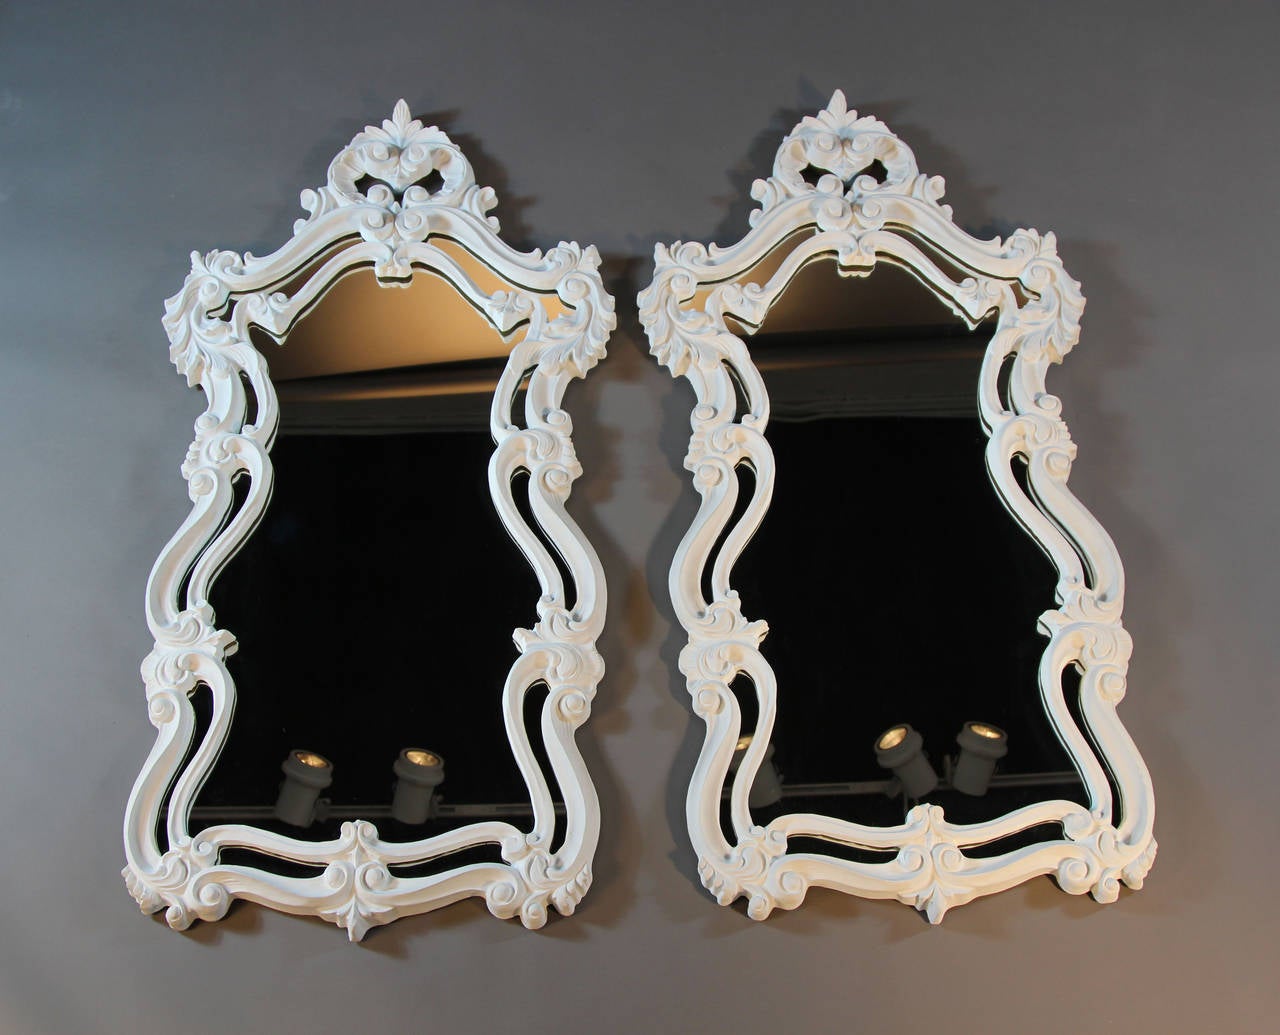 Rococo Style Mirror in White For Sale at 1stdibs